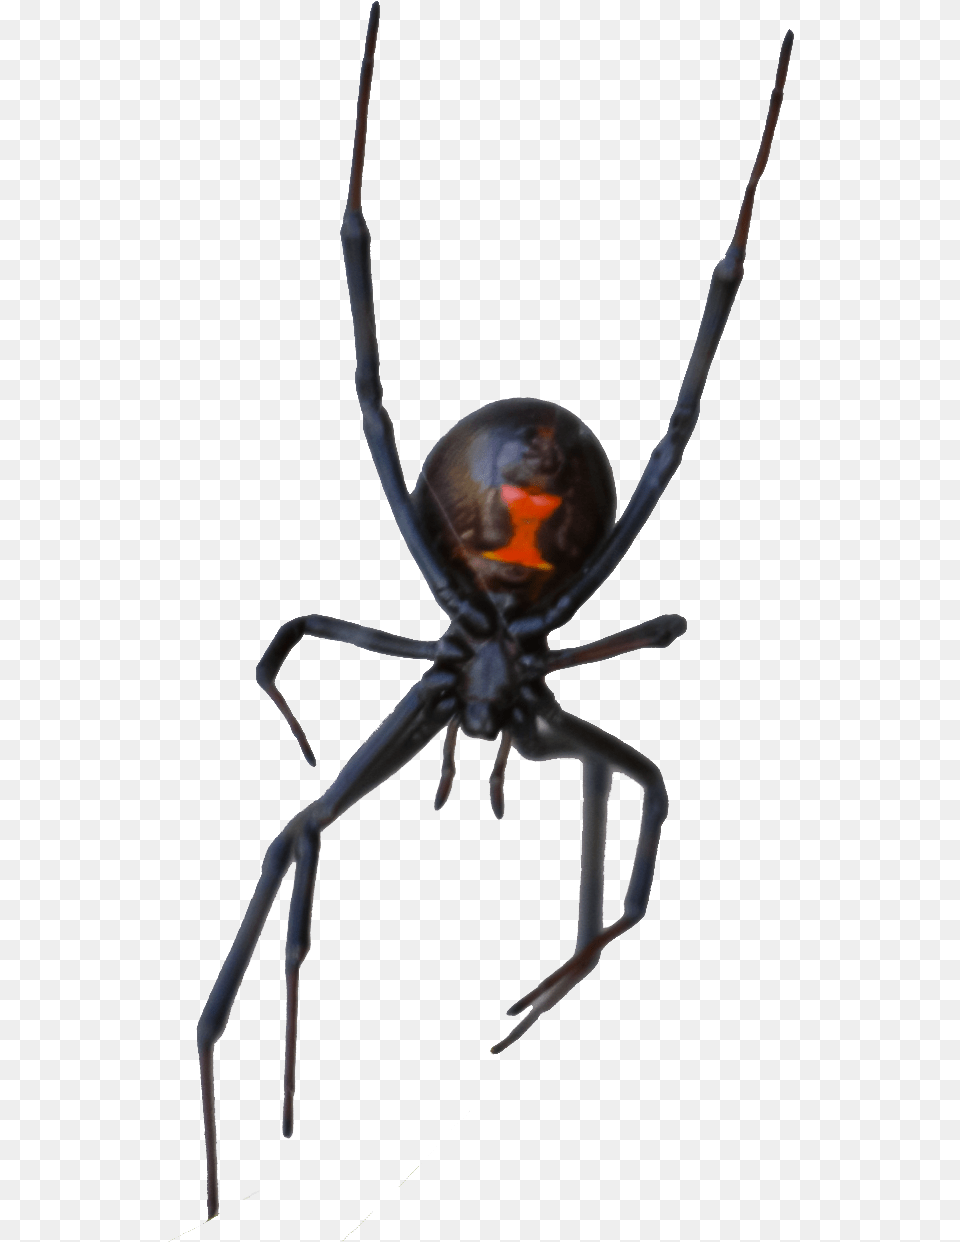 Hobo Spider Exterminators And Pest Control In Las Vegas Black Widow, Animal, Invertebrate, Black Widow, Insect Png Image